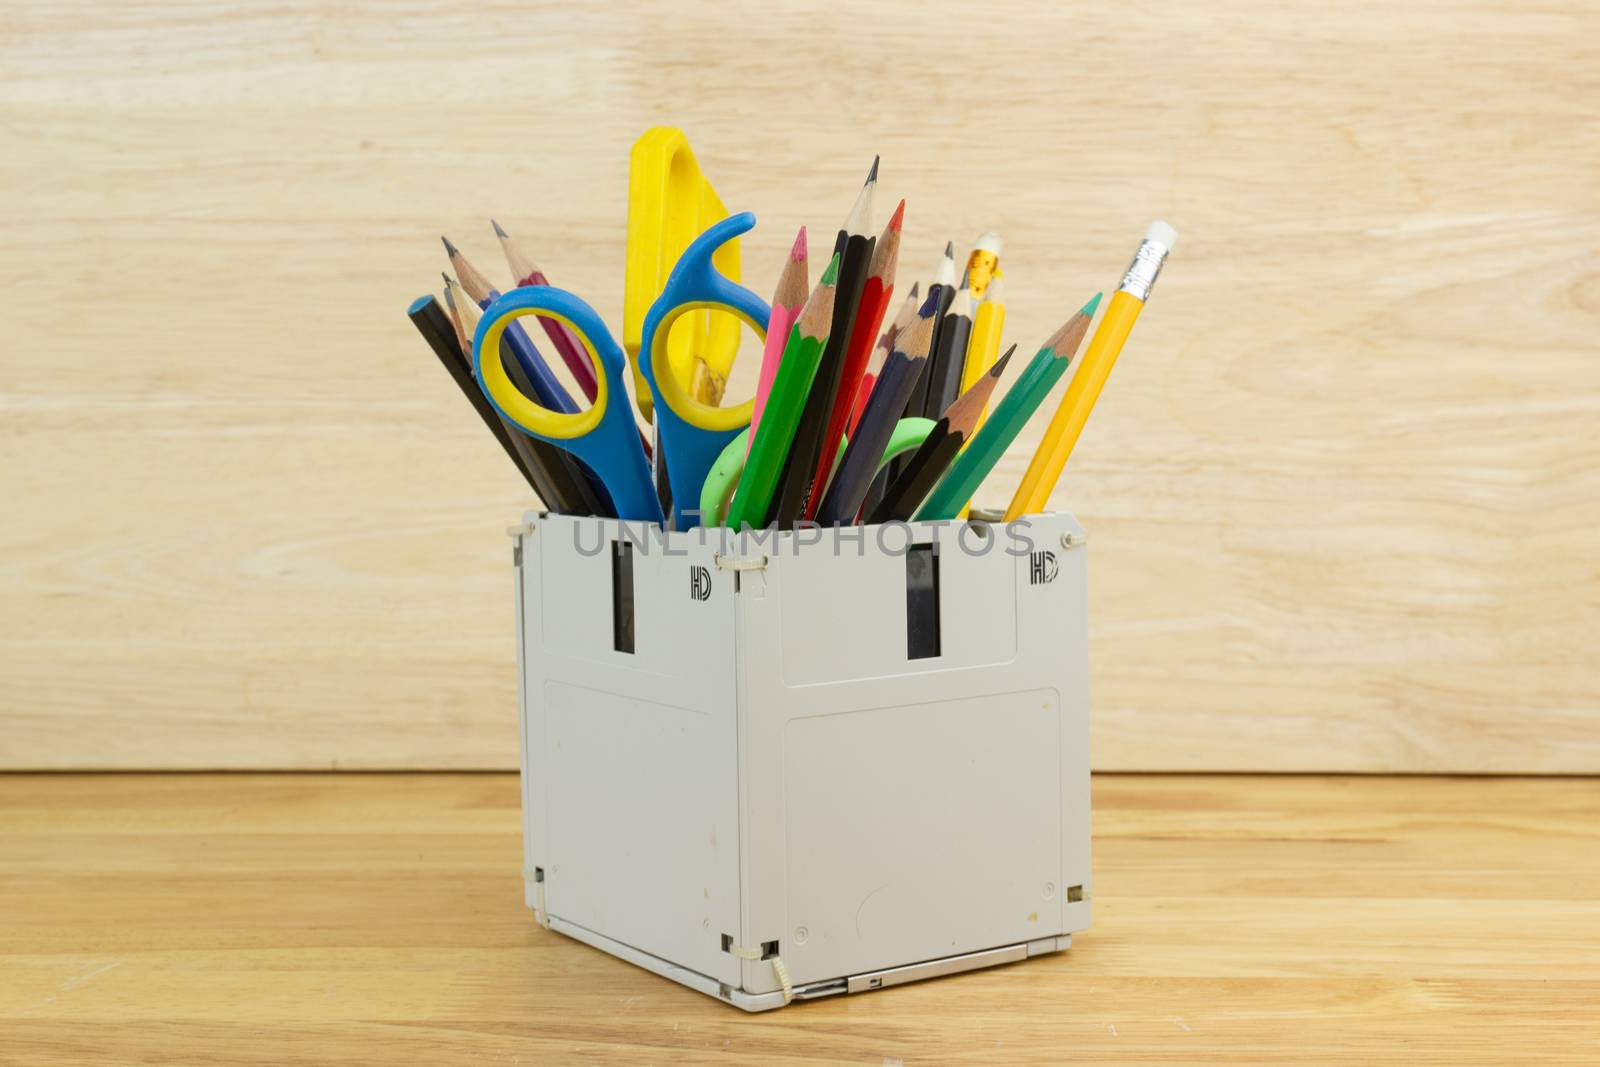 recycle floppy disk, Creative objects used for Store supplies such as pen pencils Scissors in a box on the table in work office, concept recycle floppy disk 